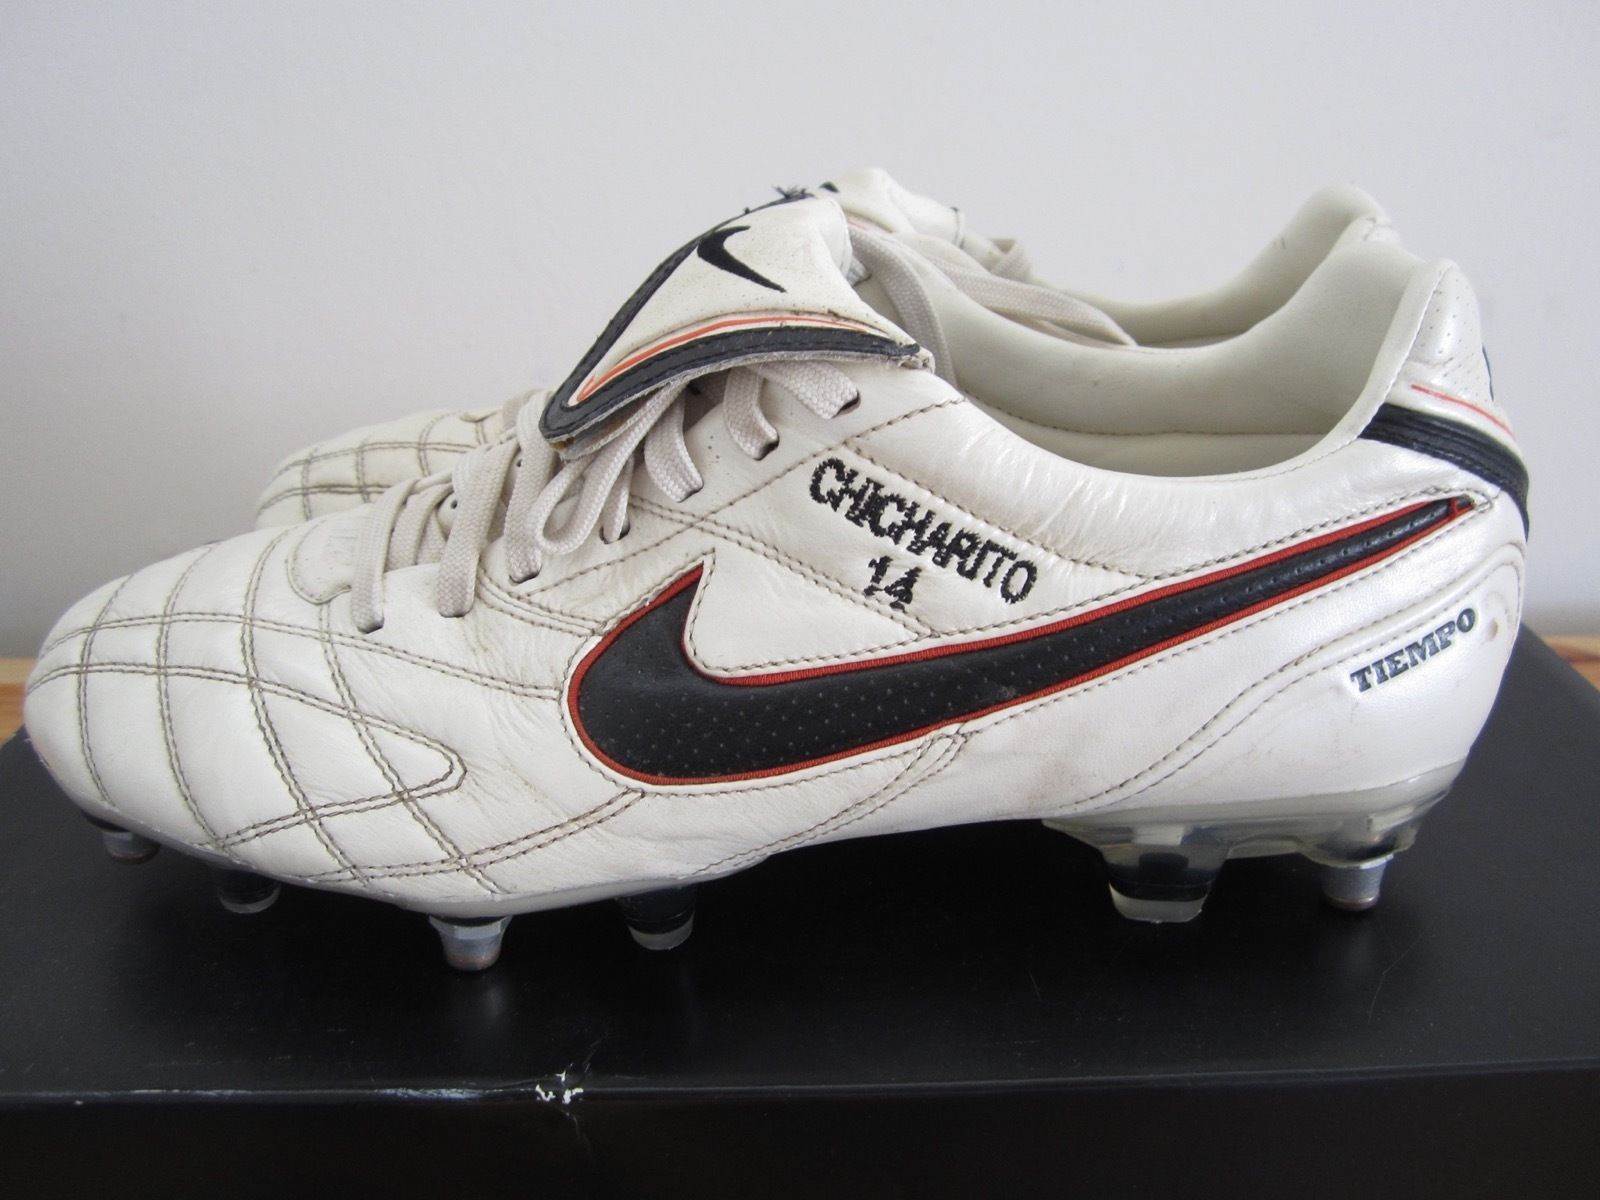 history of the Nike Tiempo - Boots 